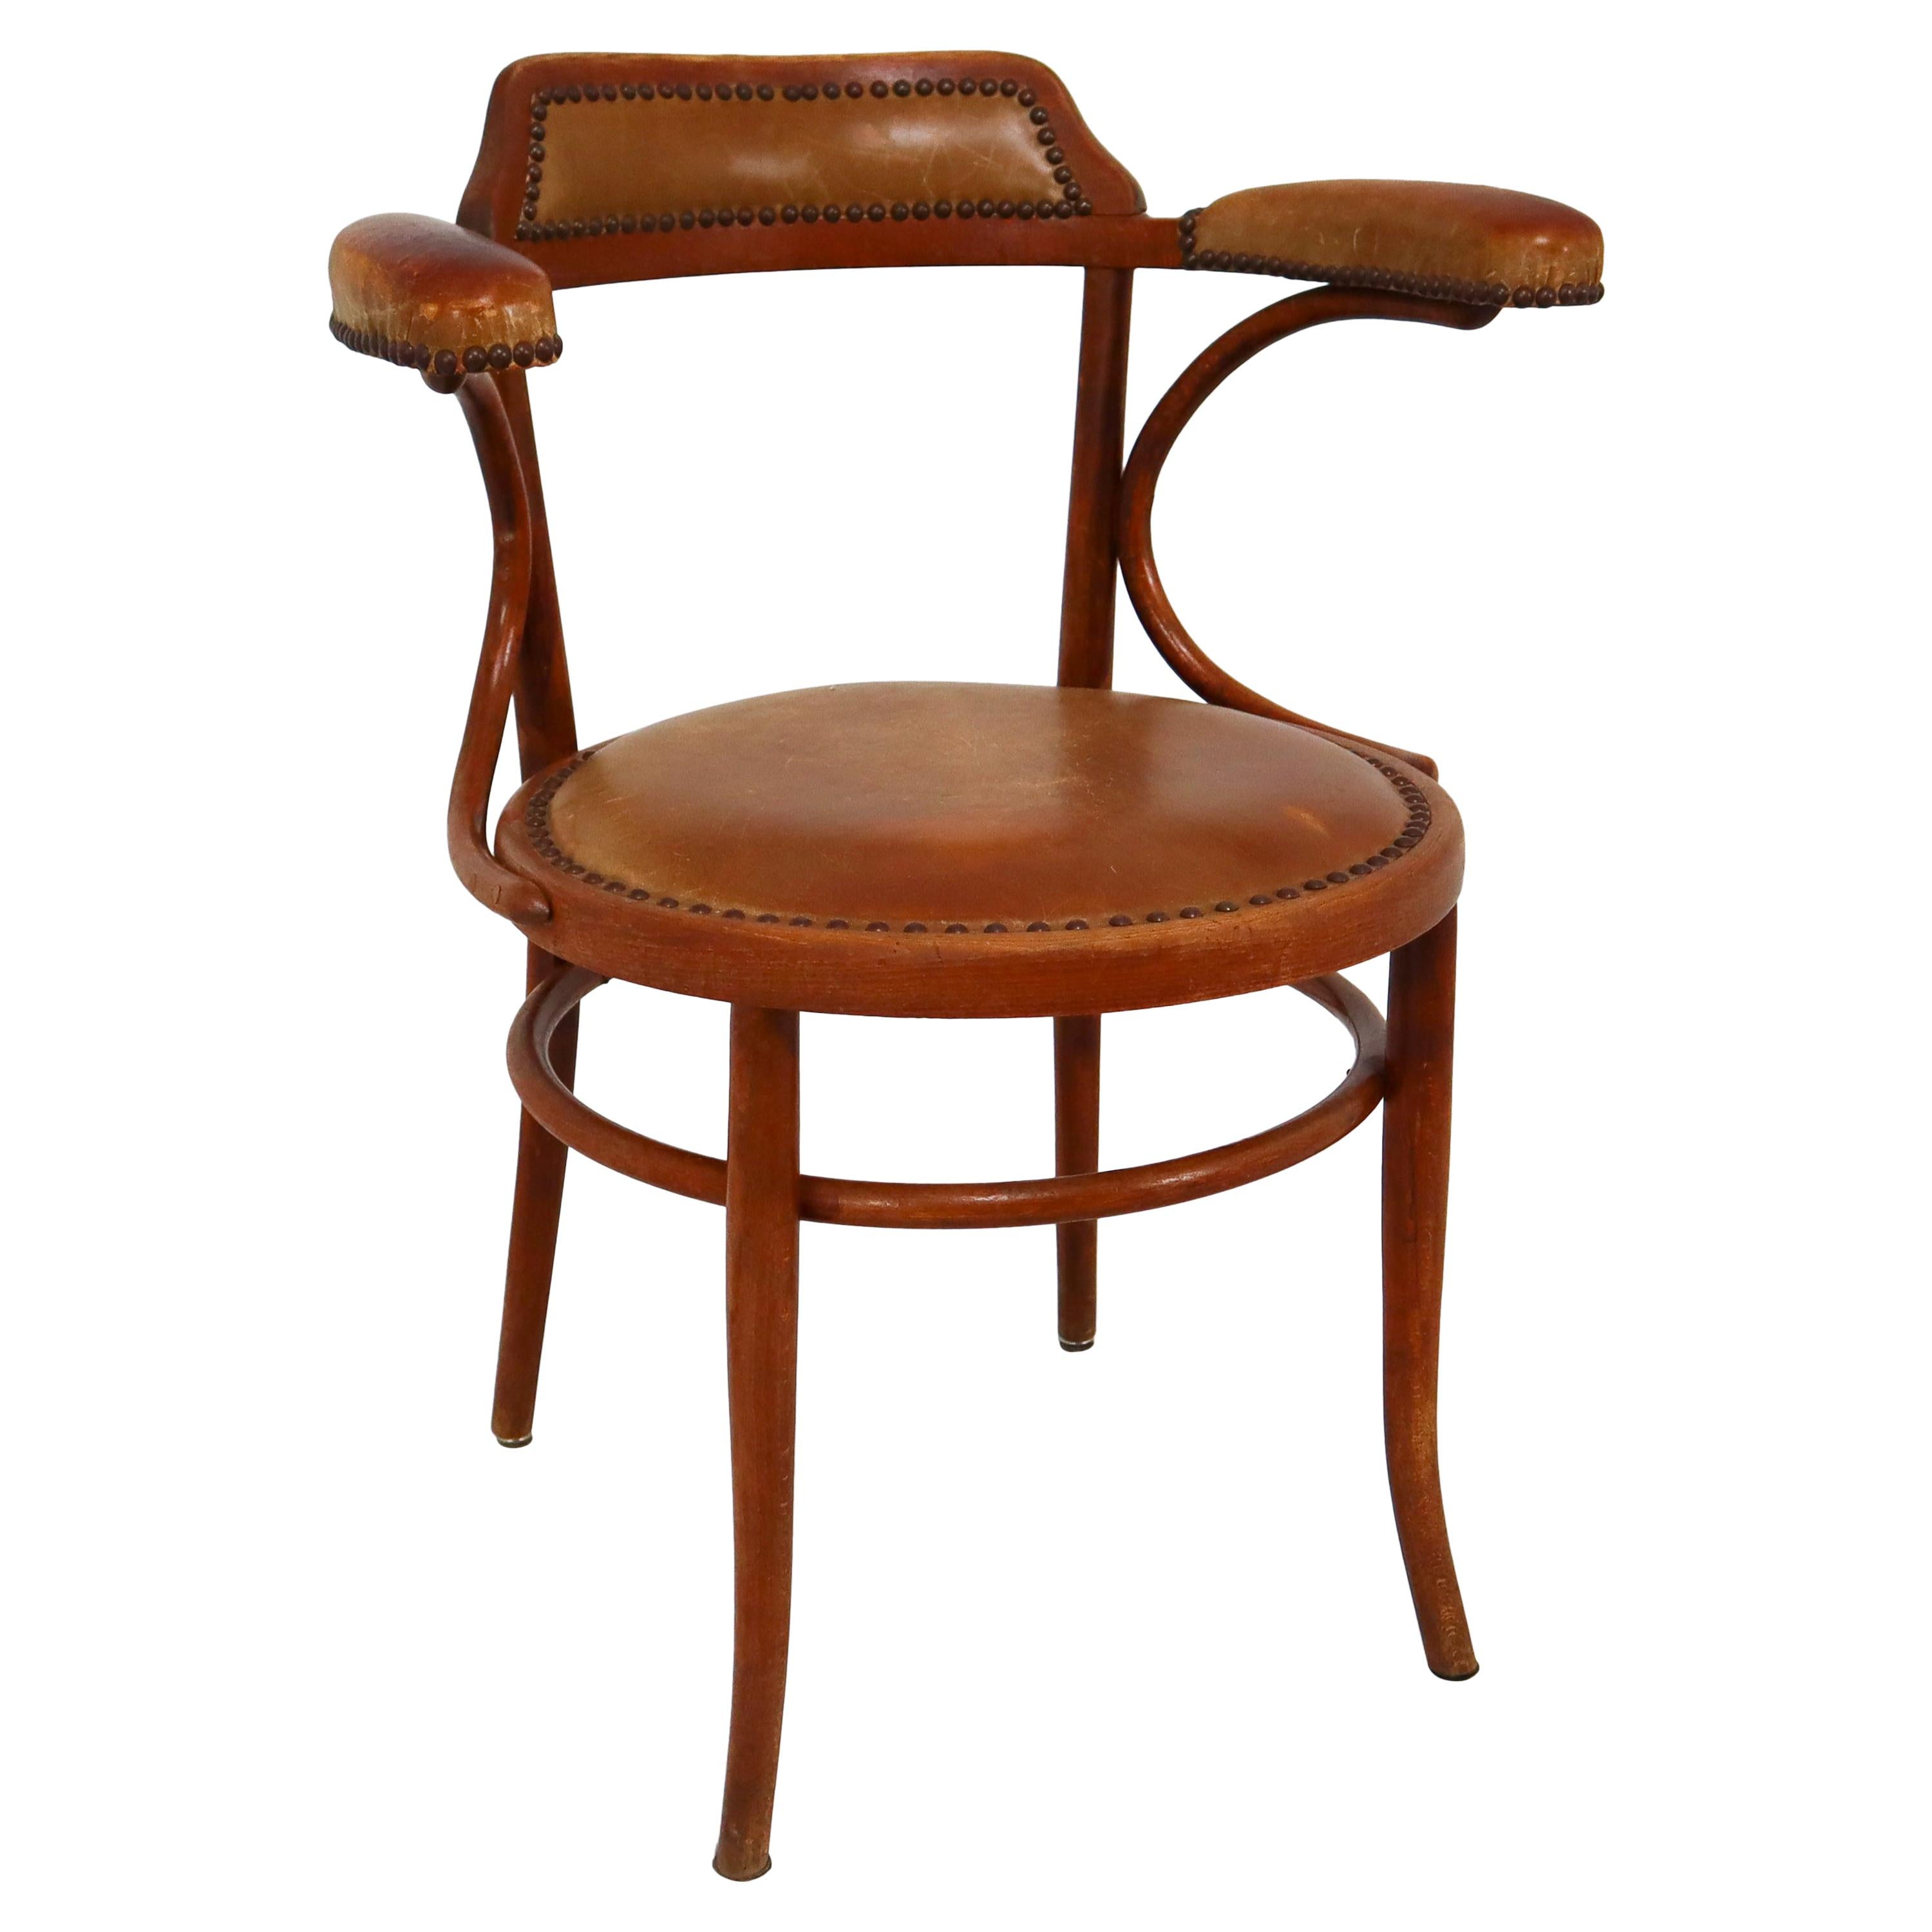 Thonet Bentwood Armchair with Patinated Leather Seat and Armrest, Vienna Austria